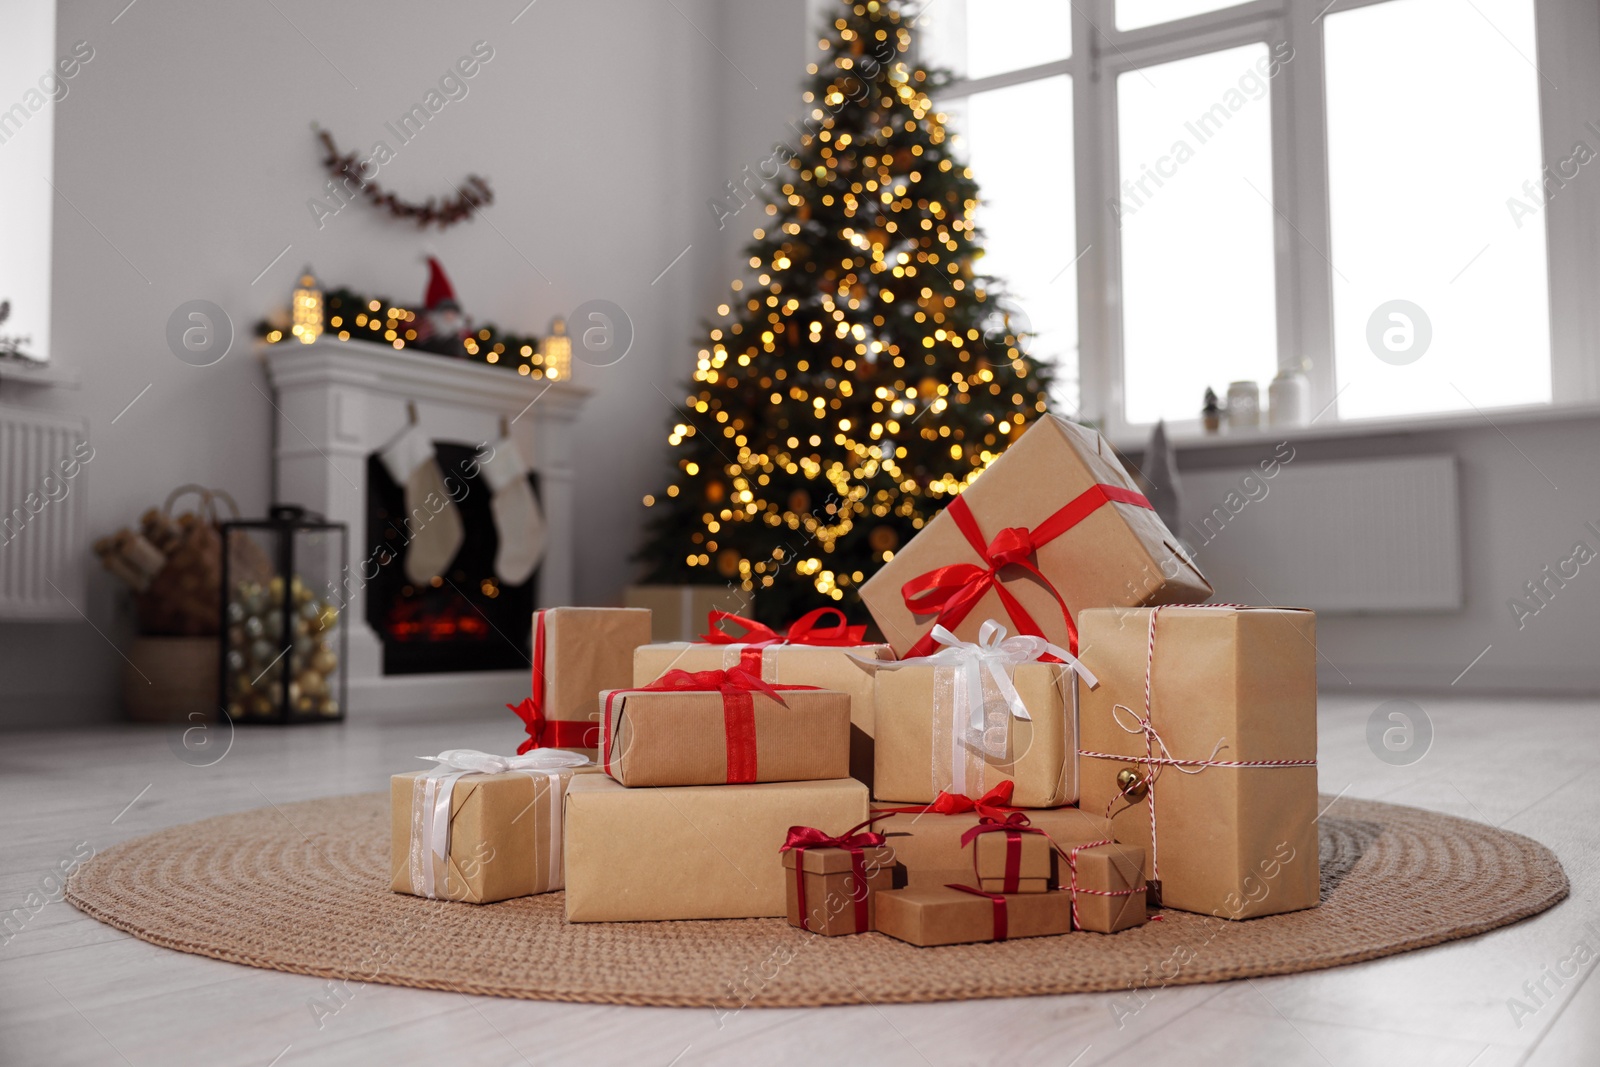 Photo of Many different gift boxes and Christmas decor in living room